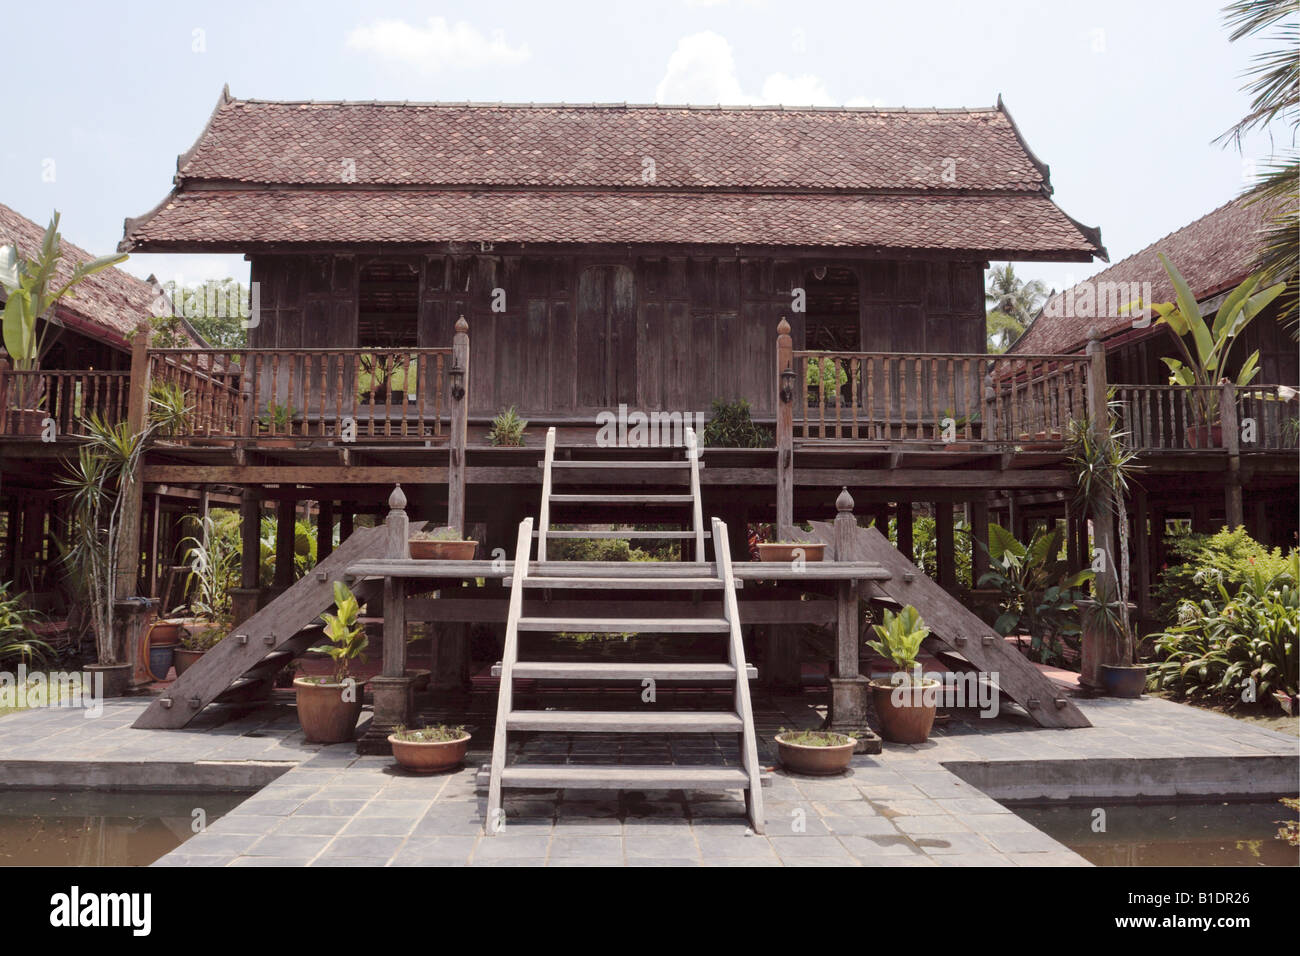 Traditional Timber Malay House At Pura Tanjung Sabtu In Terengganu Malaysia The Roof Is Made Of Baked Clay Tile Stock Photo Alamy